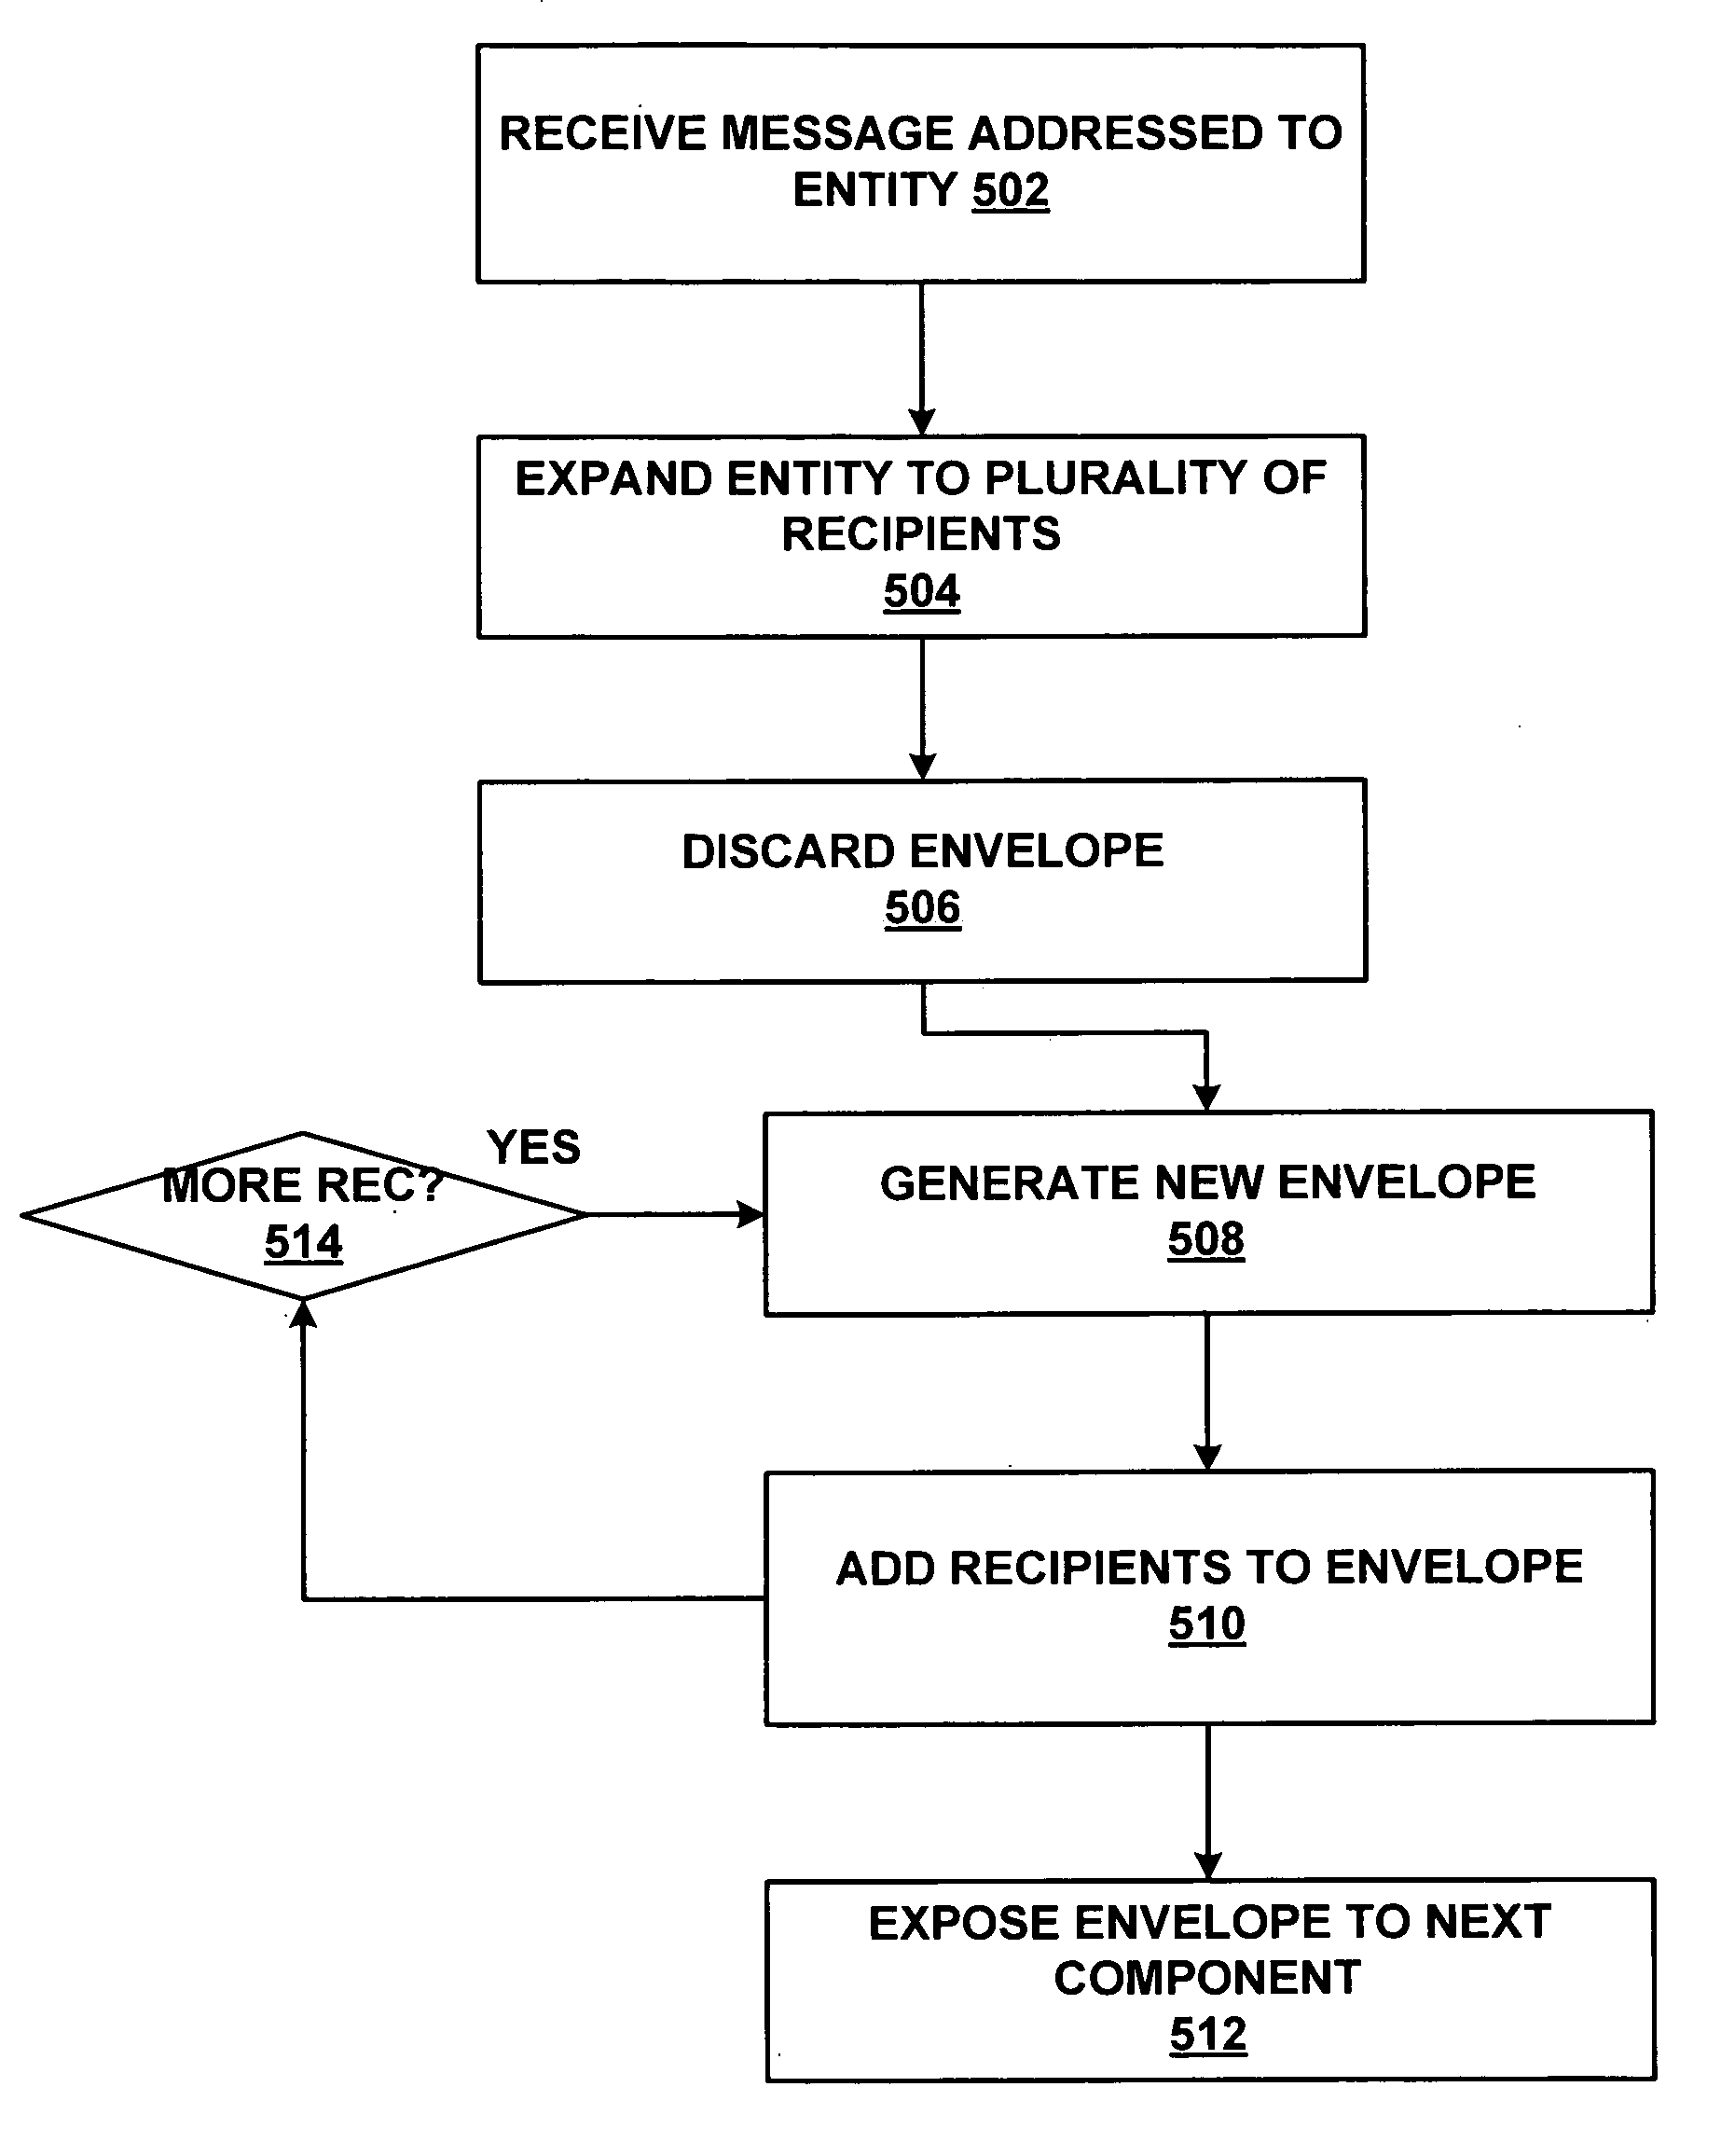 Managing working set in an extensible message transfer system